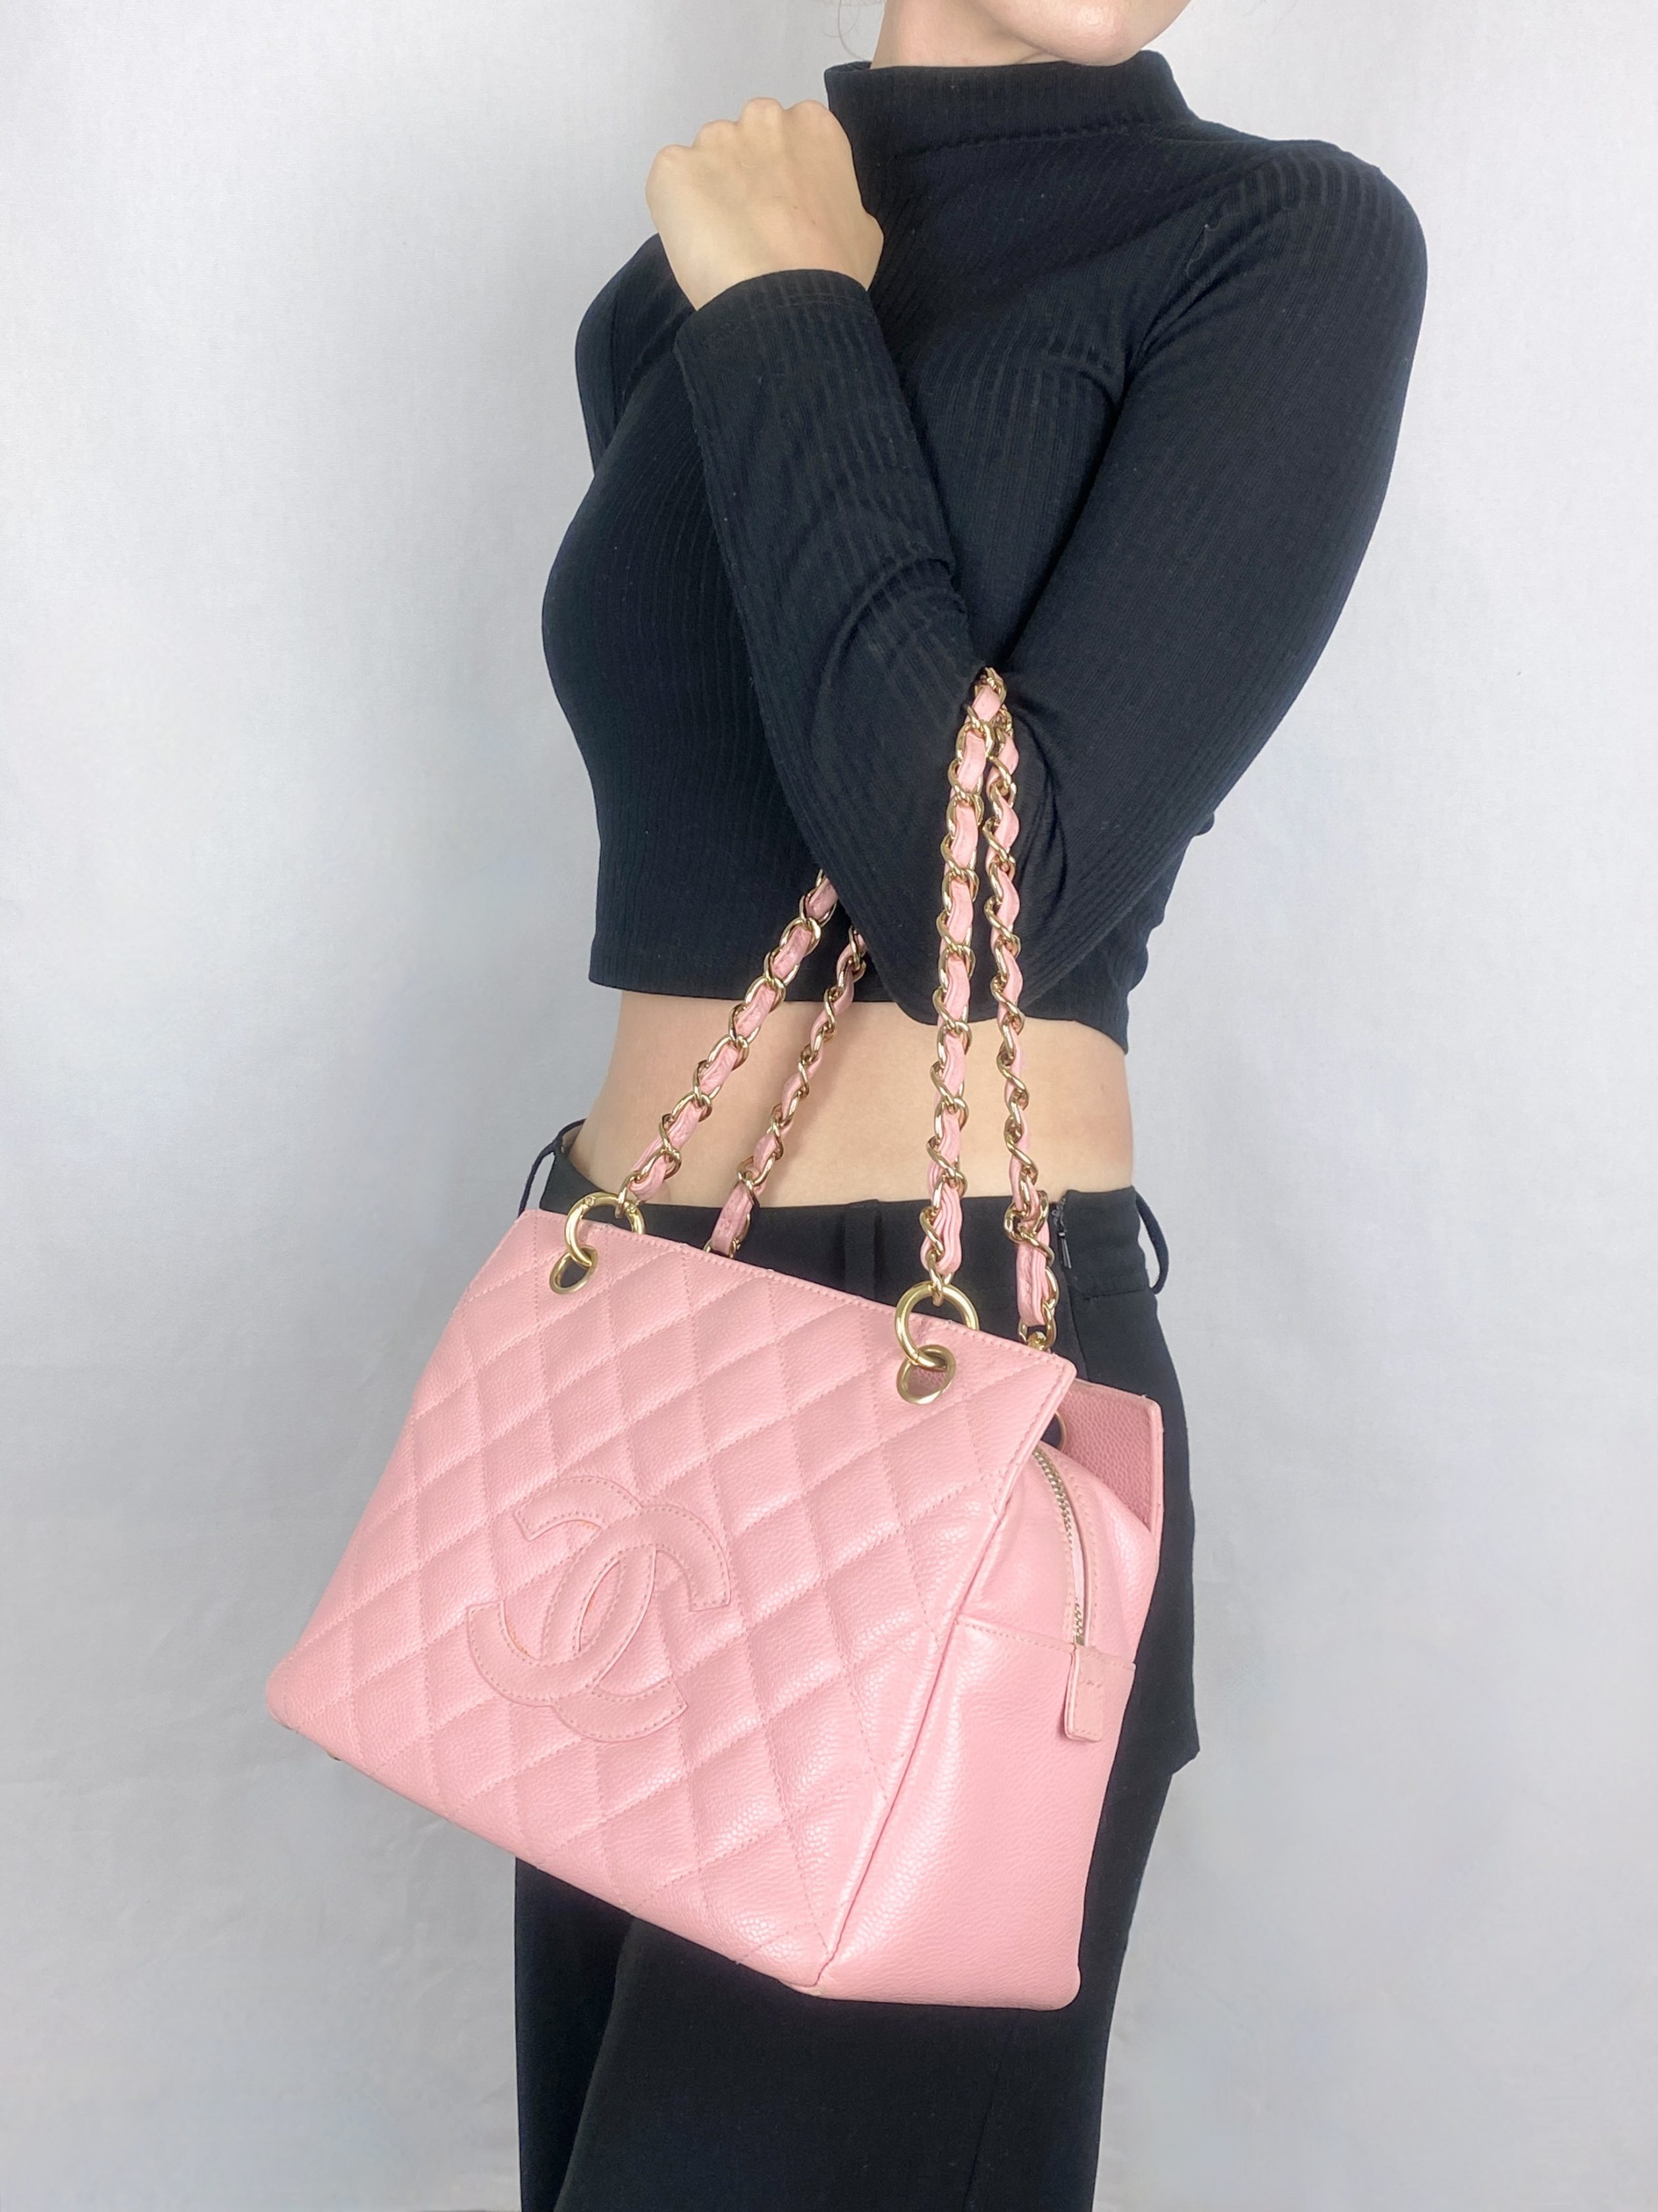 Chanel Discontinued Petite Timeless Tote (PTT) in Caviar Pink